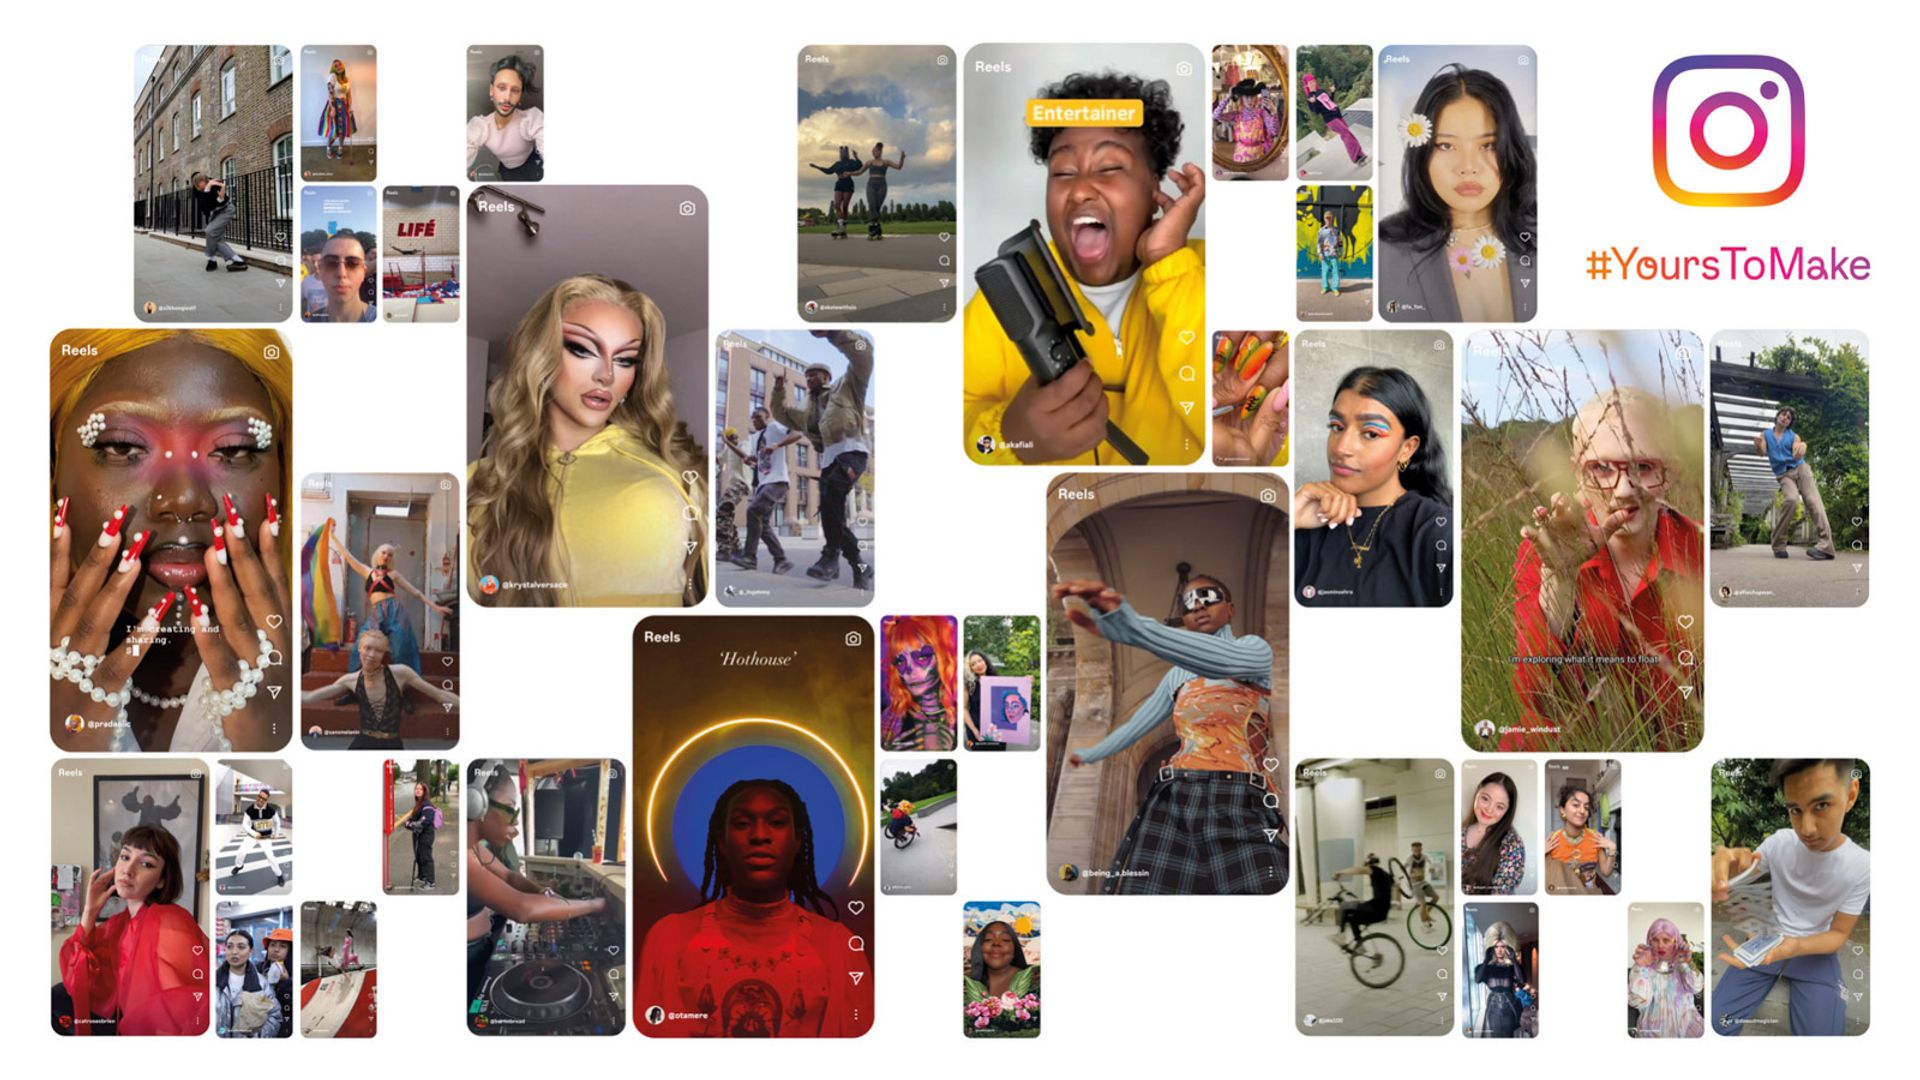 Instagram's “Yours to Make” initiative aims to attract young people to the platform Instagram